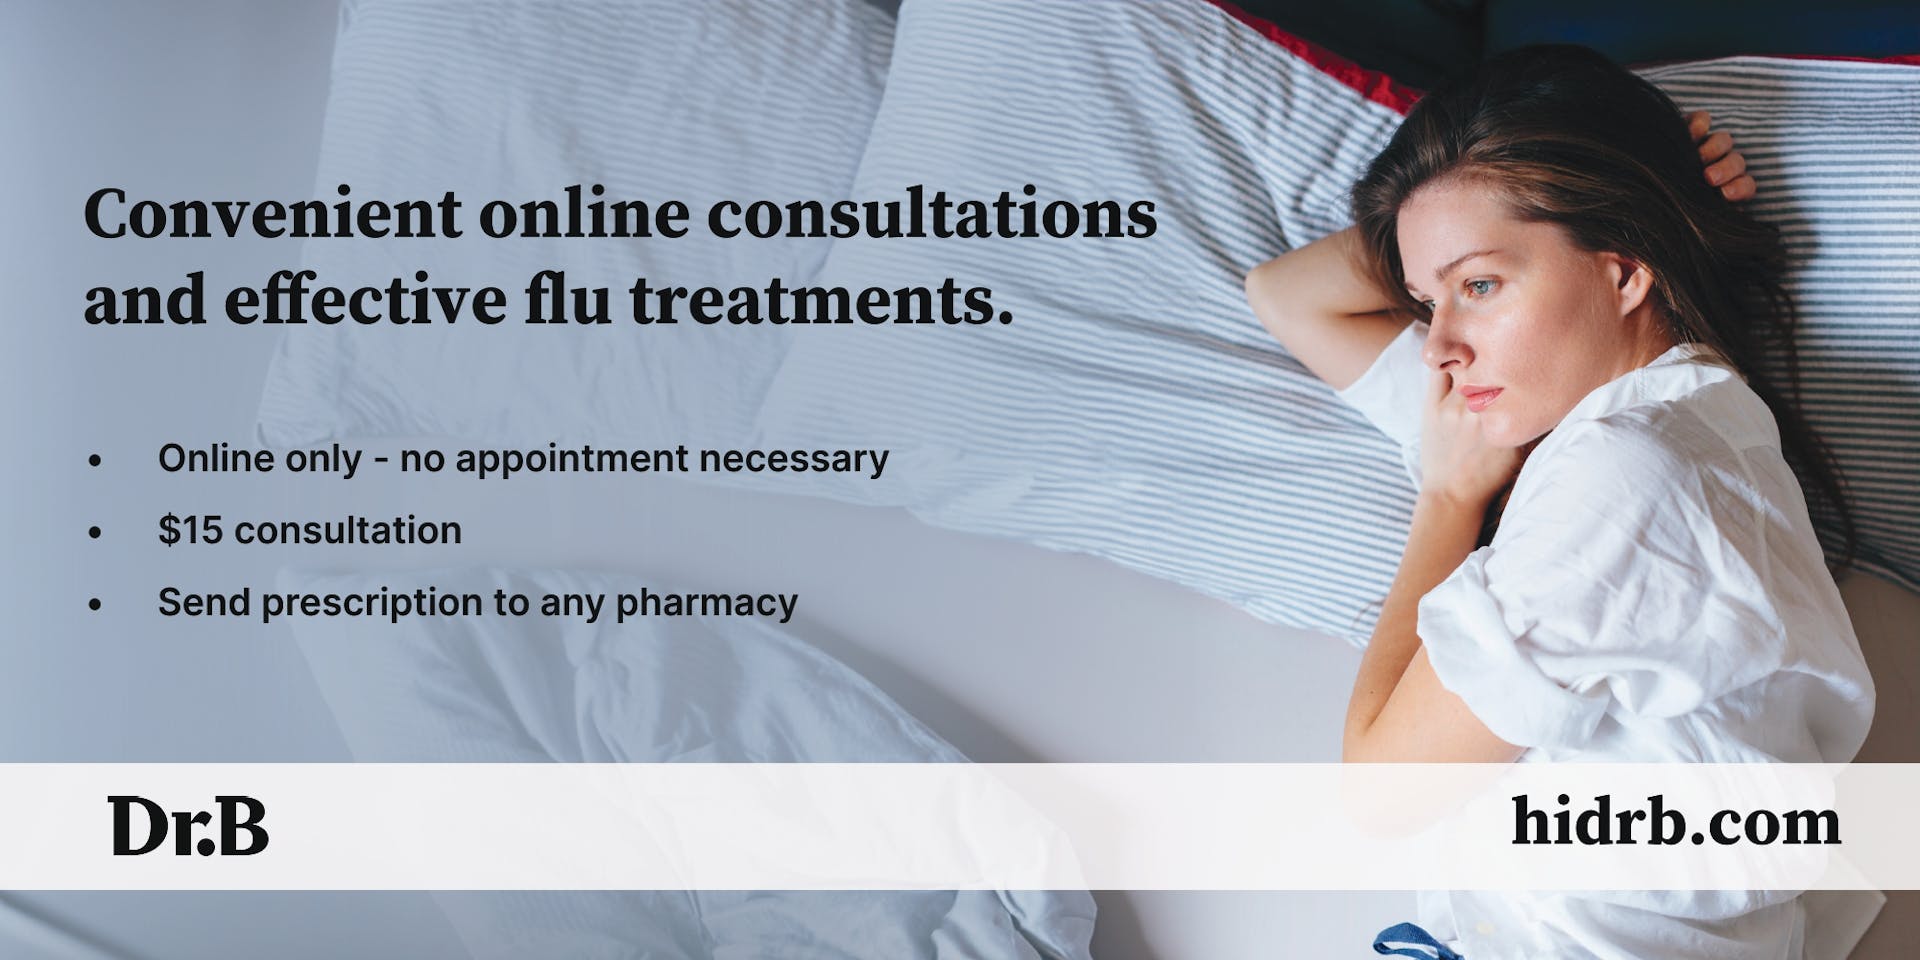 Banner advertising Dr. B's services for flu treatments